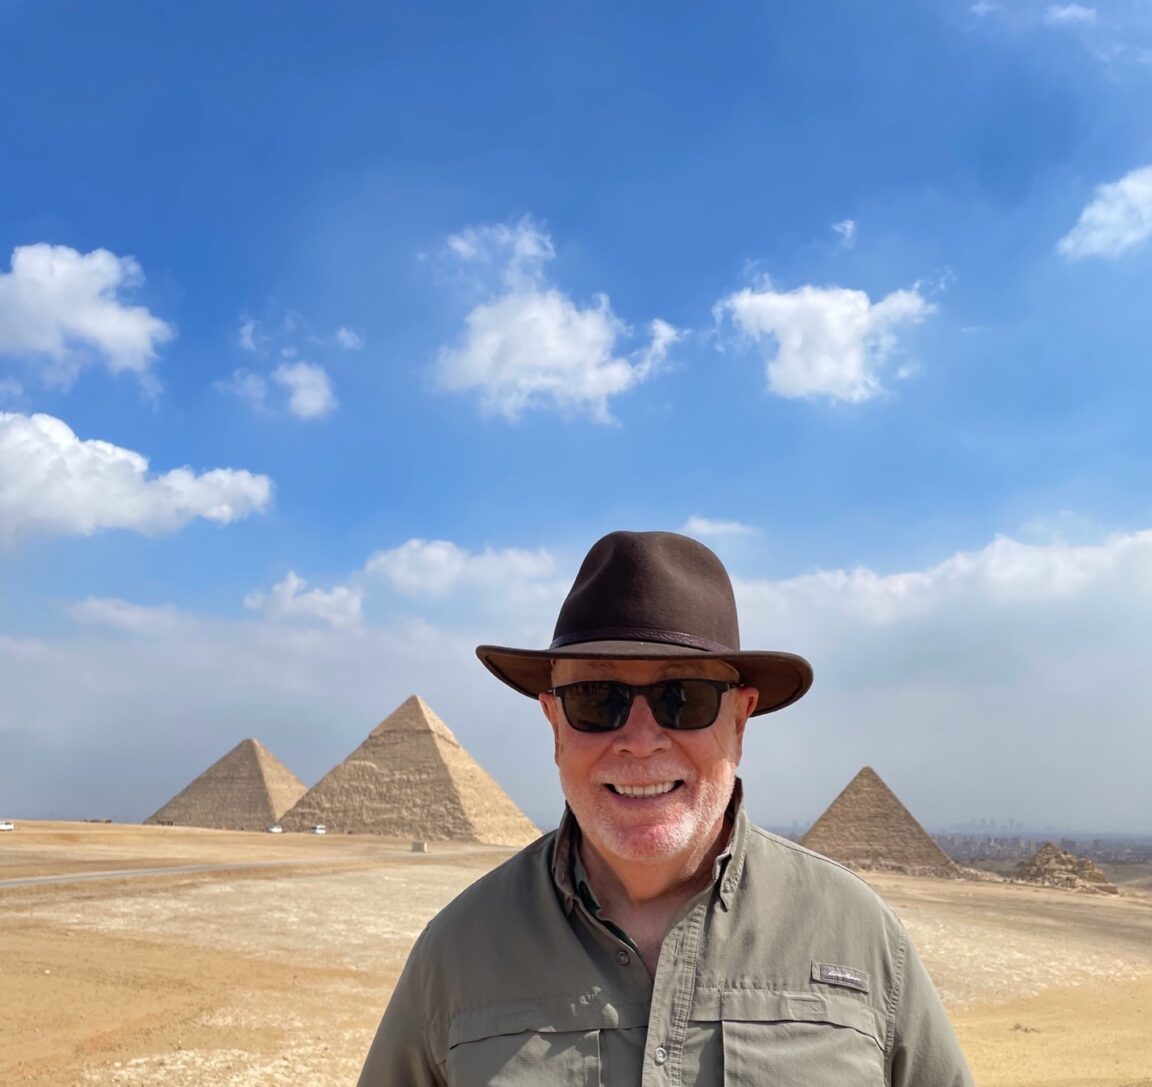 Tom wearing a hat and sunglasses stands in front of pyramids